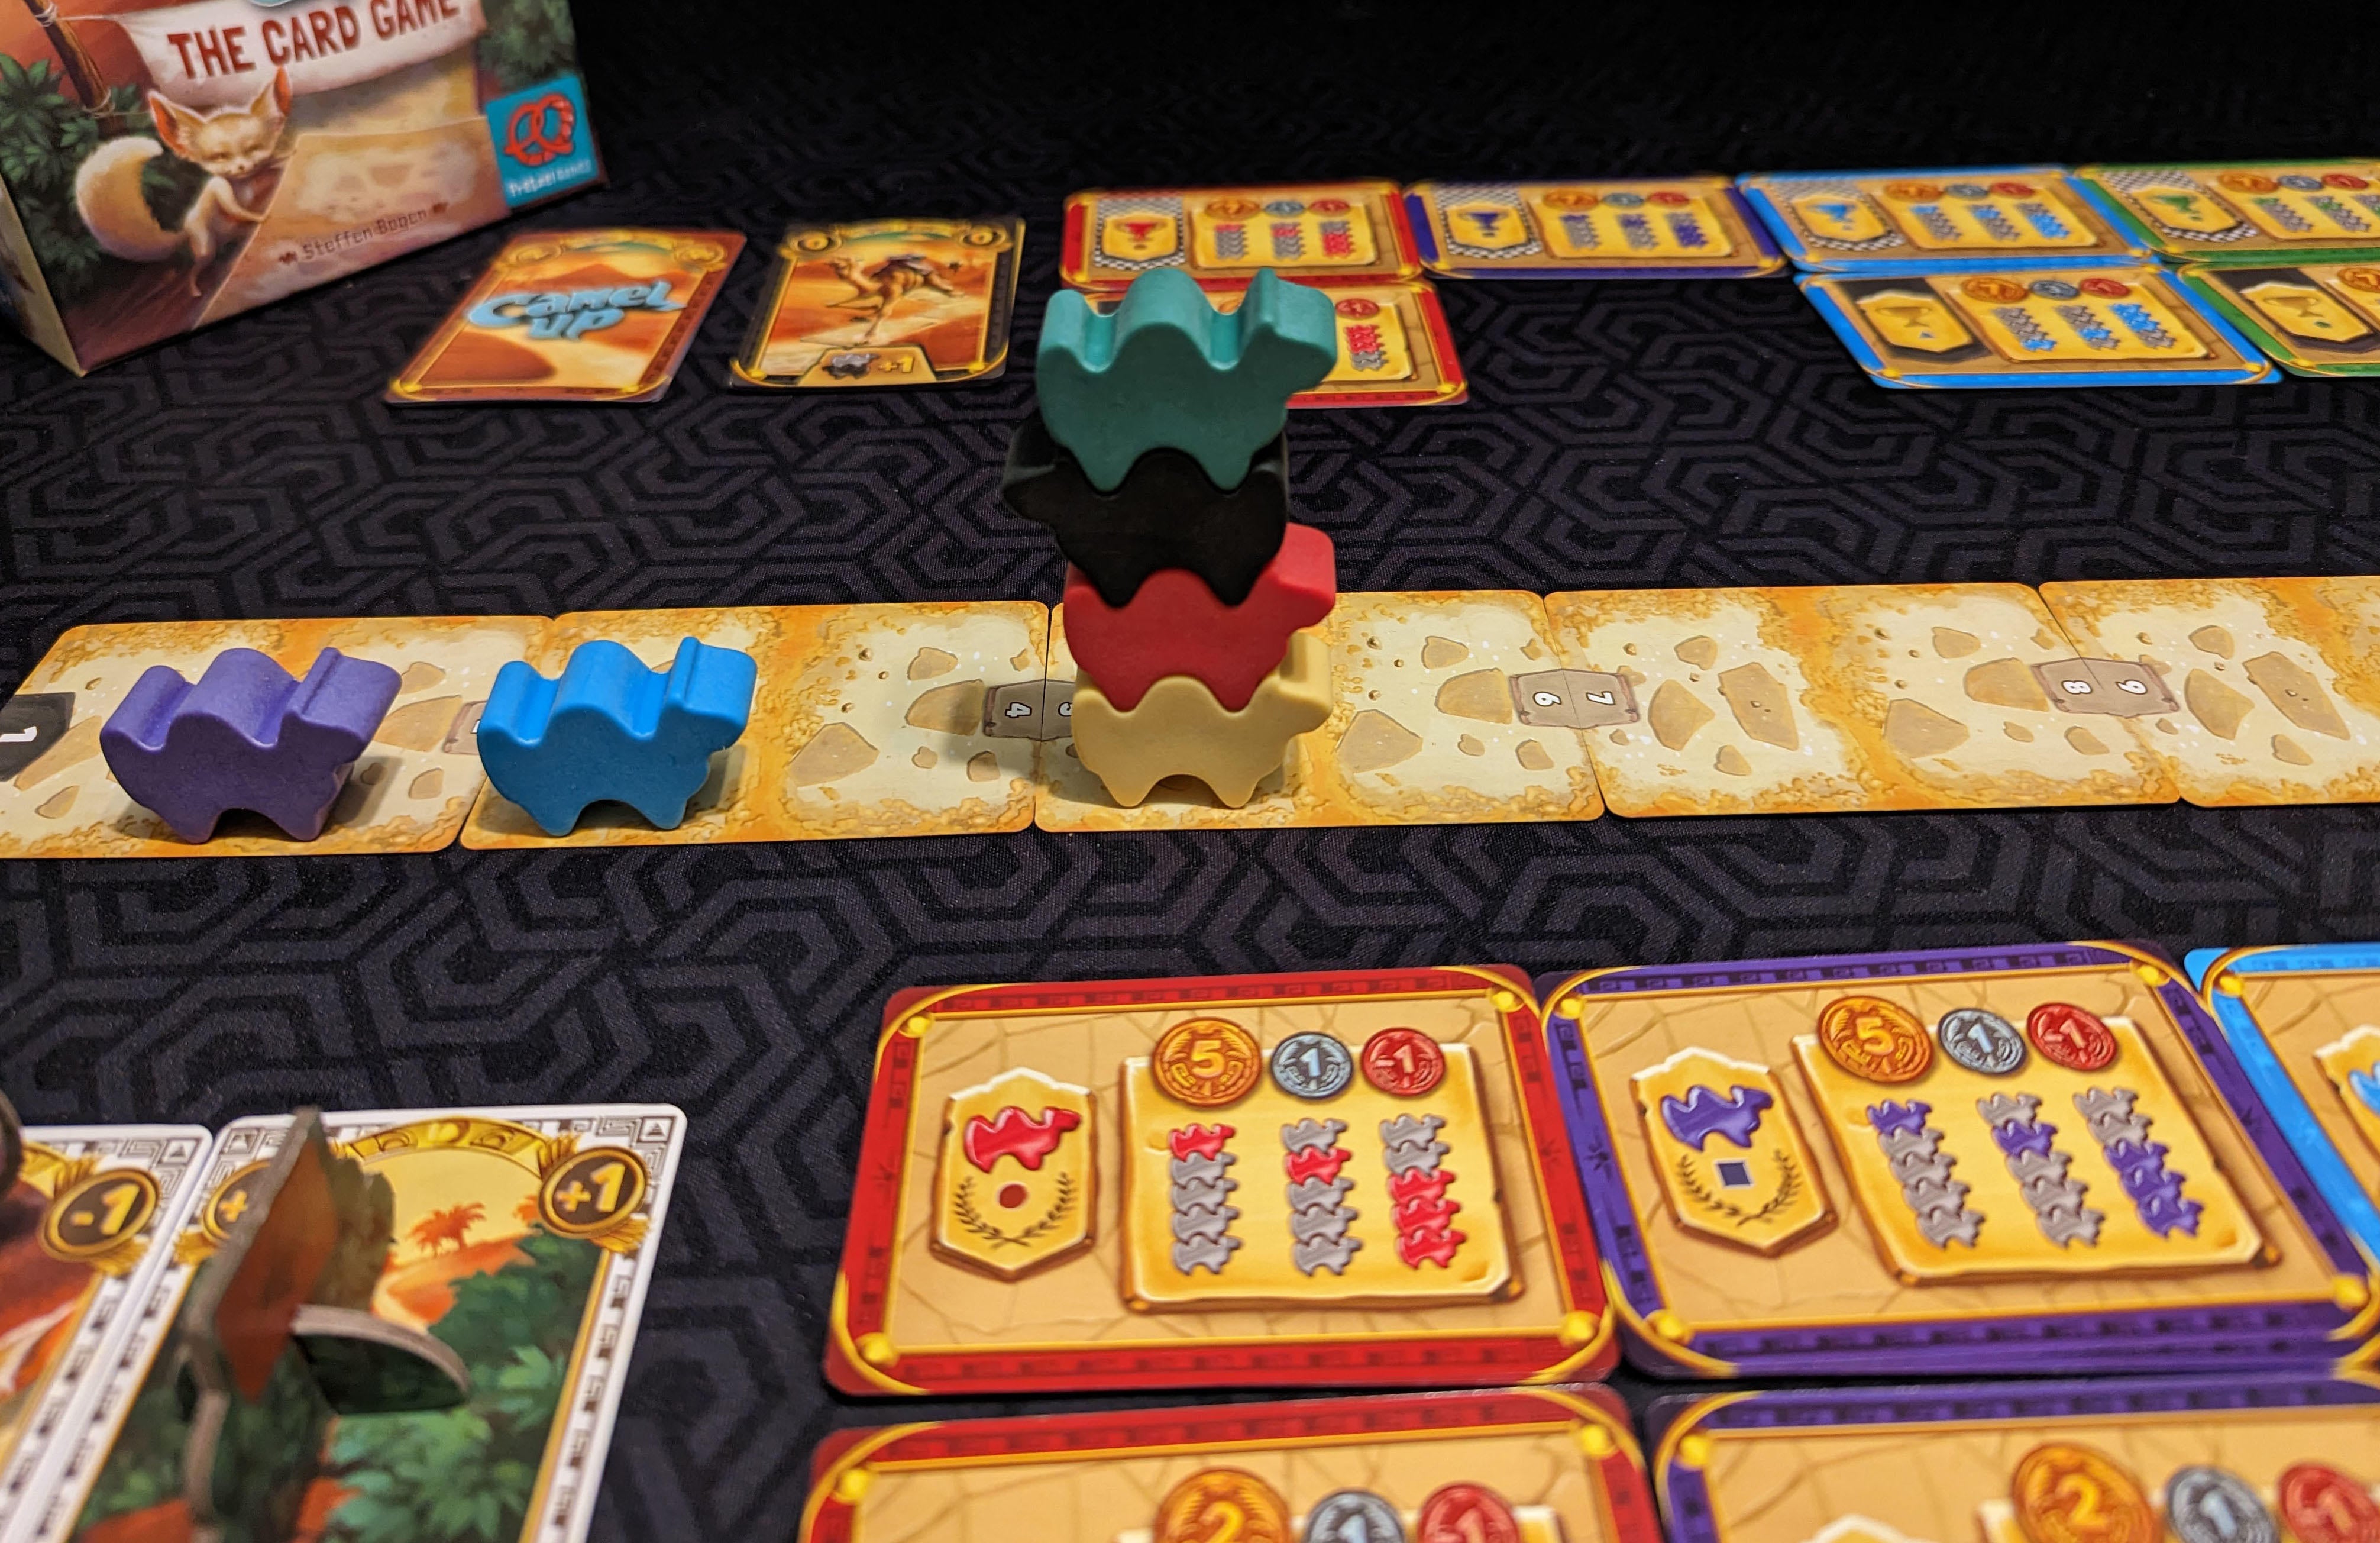 Camel Up The Card Game Review: The Delightful Chaos of the